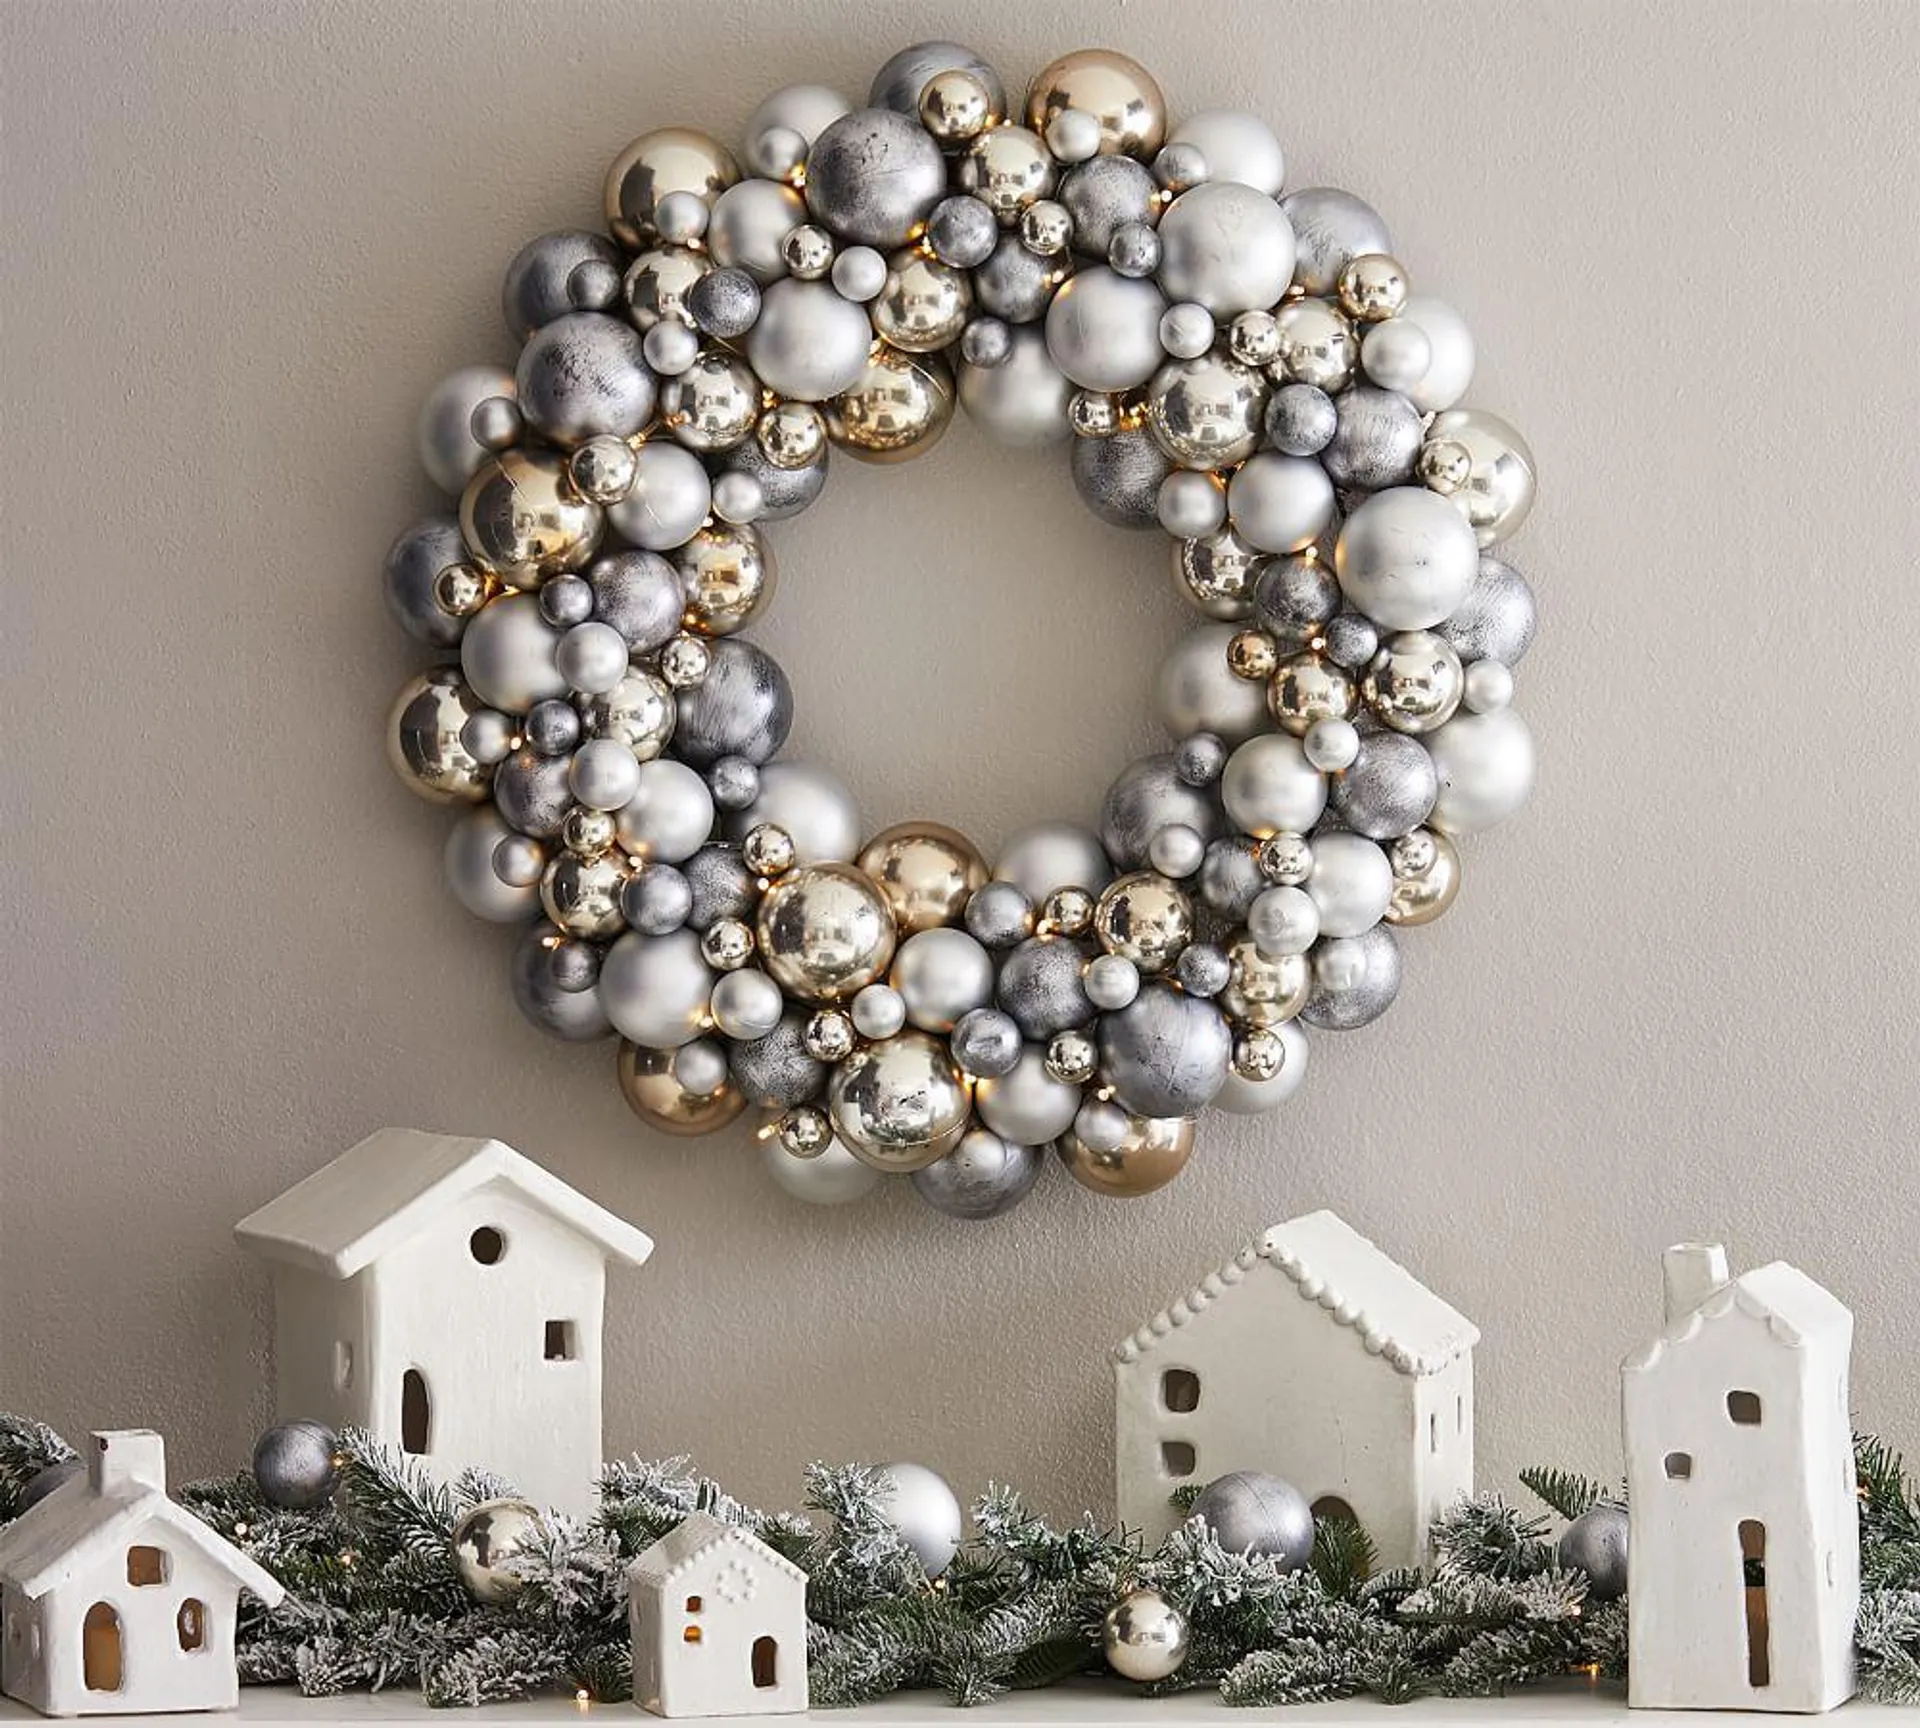 Pre-Lit Faux Frosted Pine and Ornament Wreath & Garland